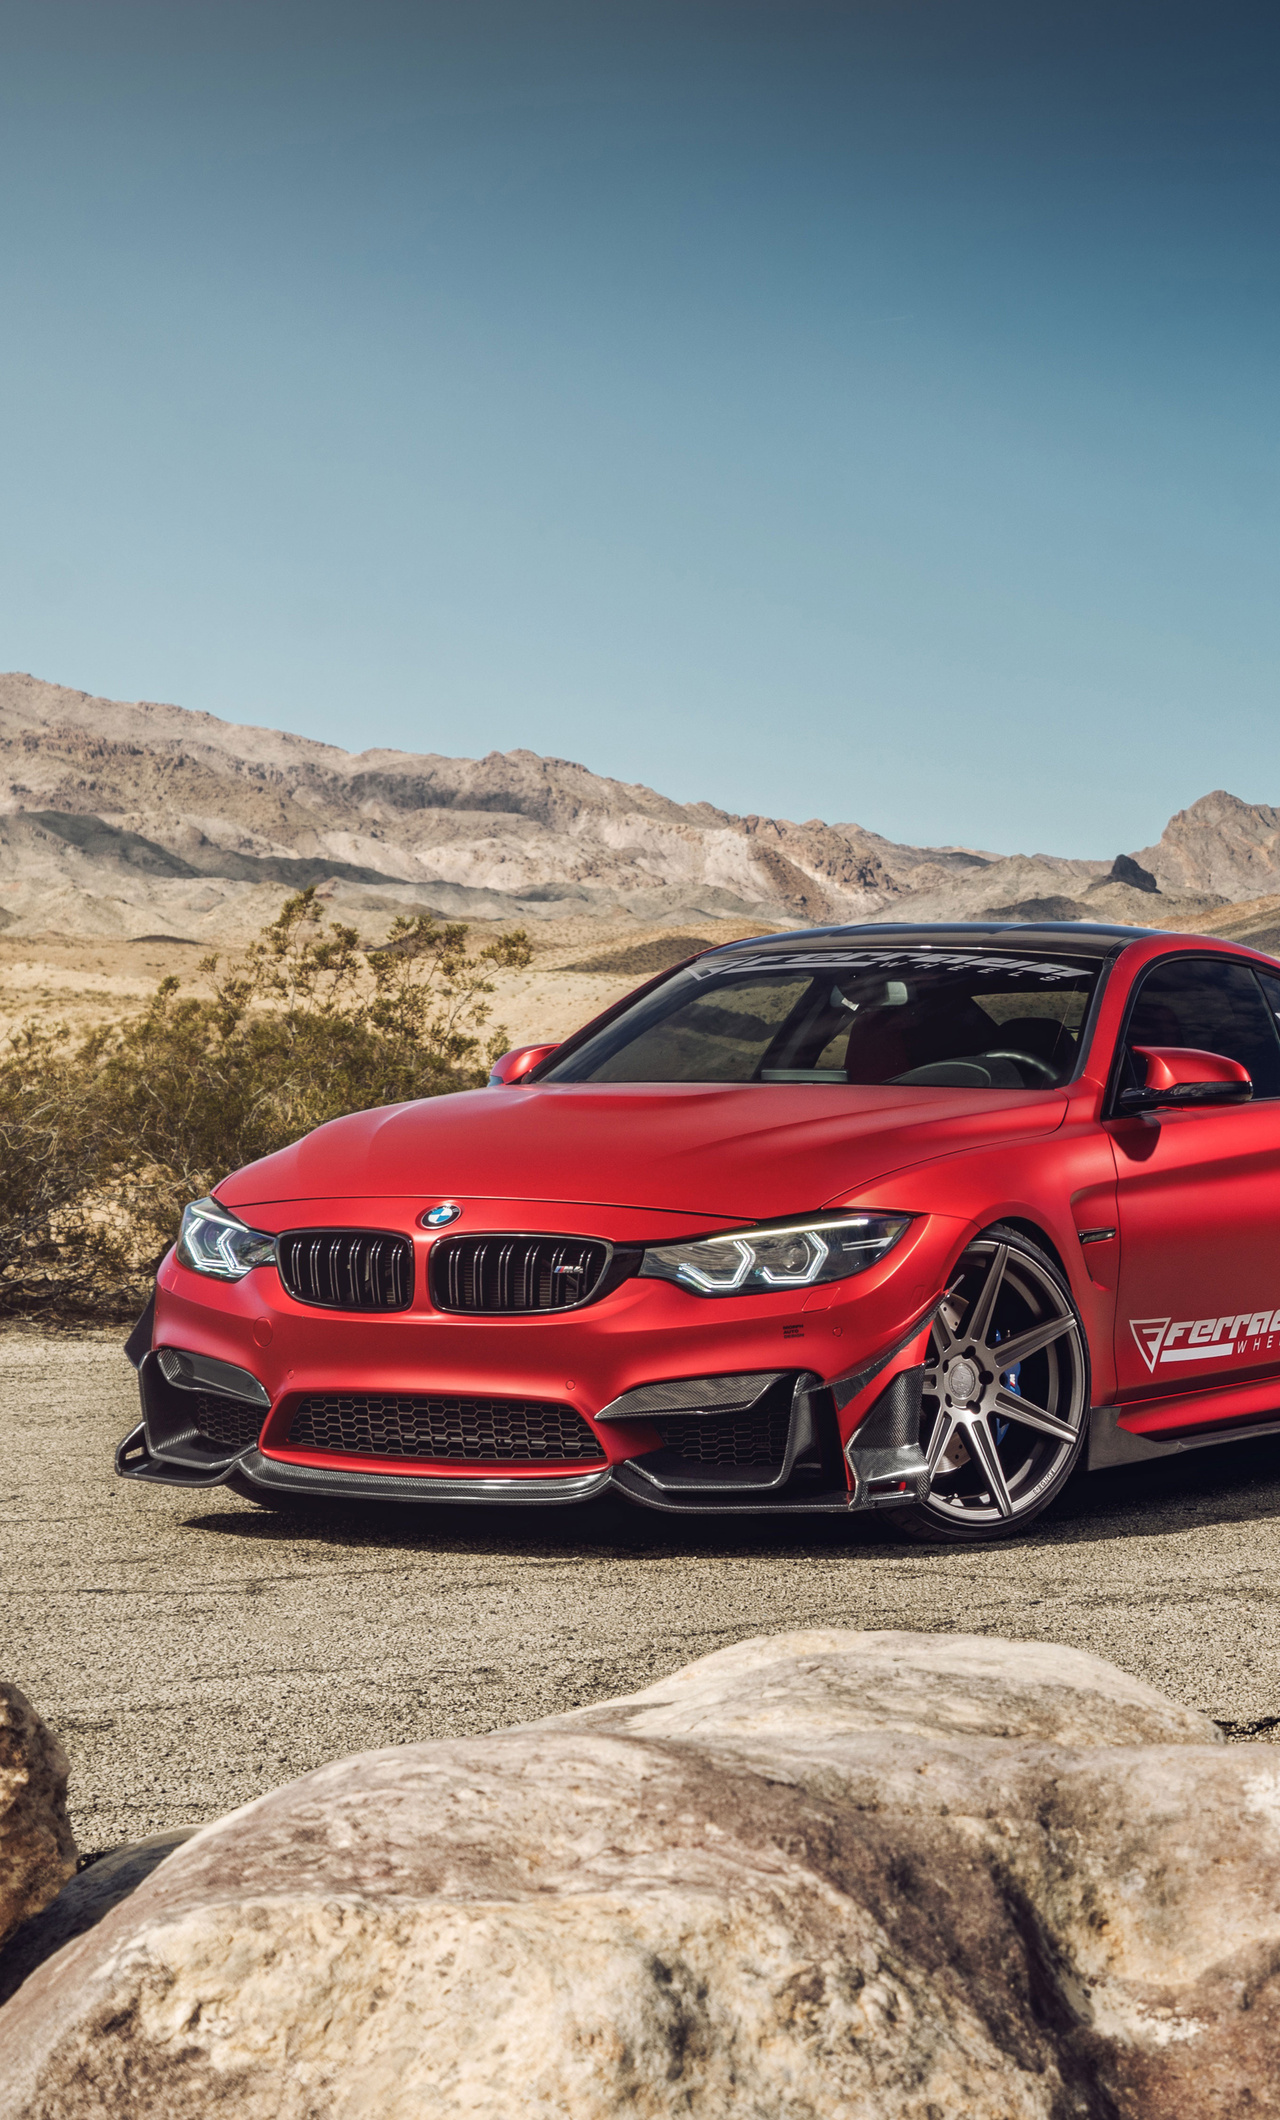 1280x21 Bmw M4 Ferrada Wheels 8k Iphone 6 Hd 4k Wallpapers Images Backgrounds Photos And Pictures